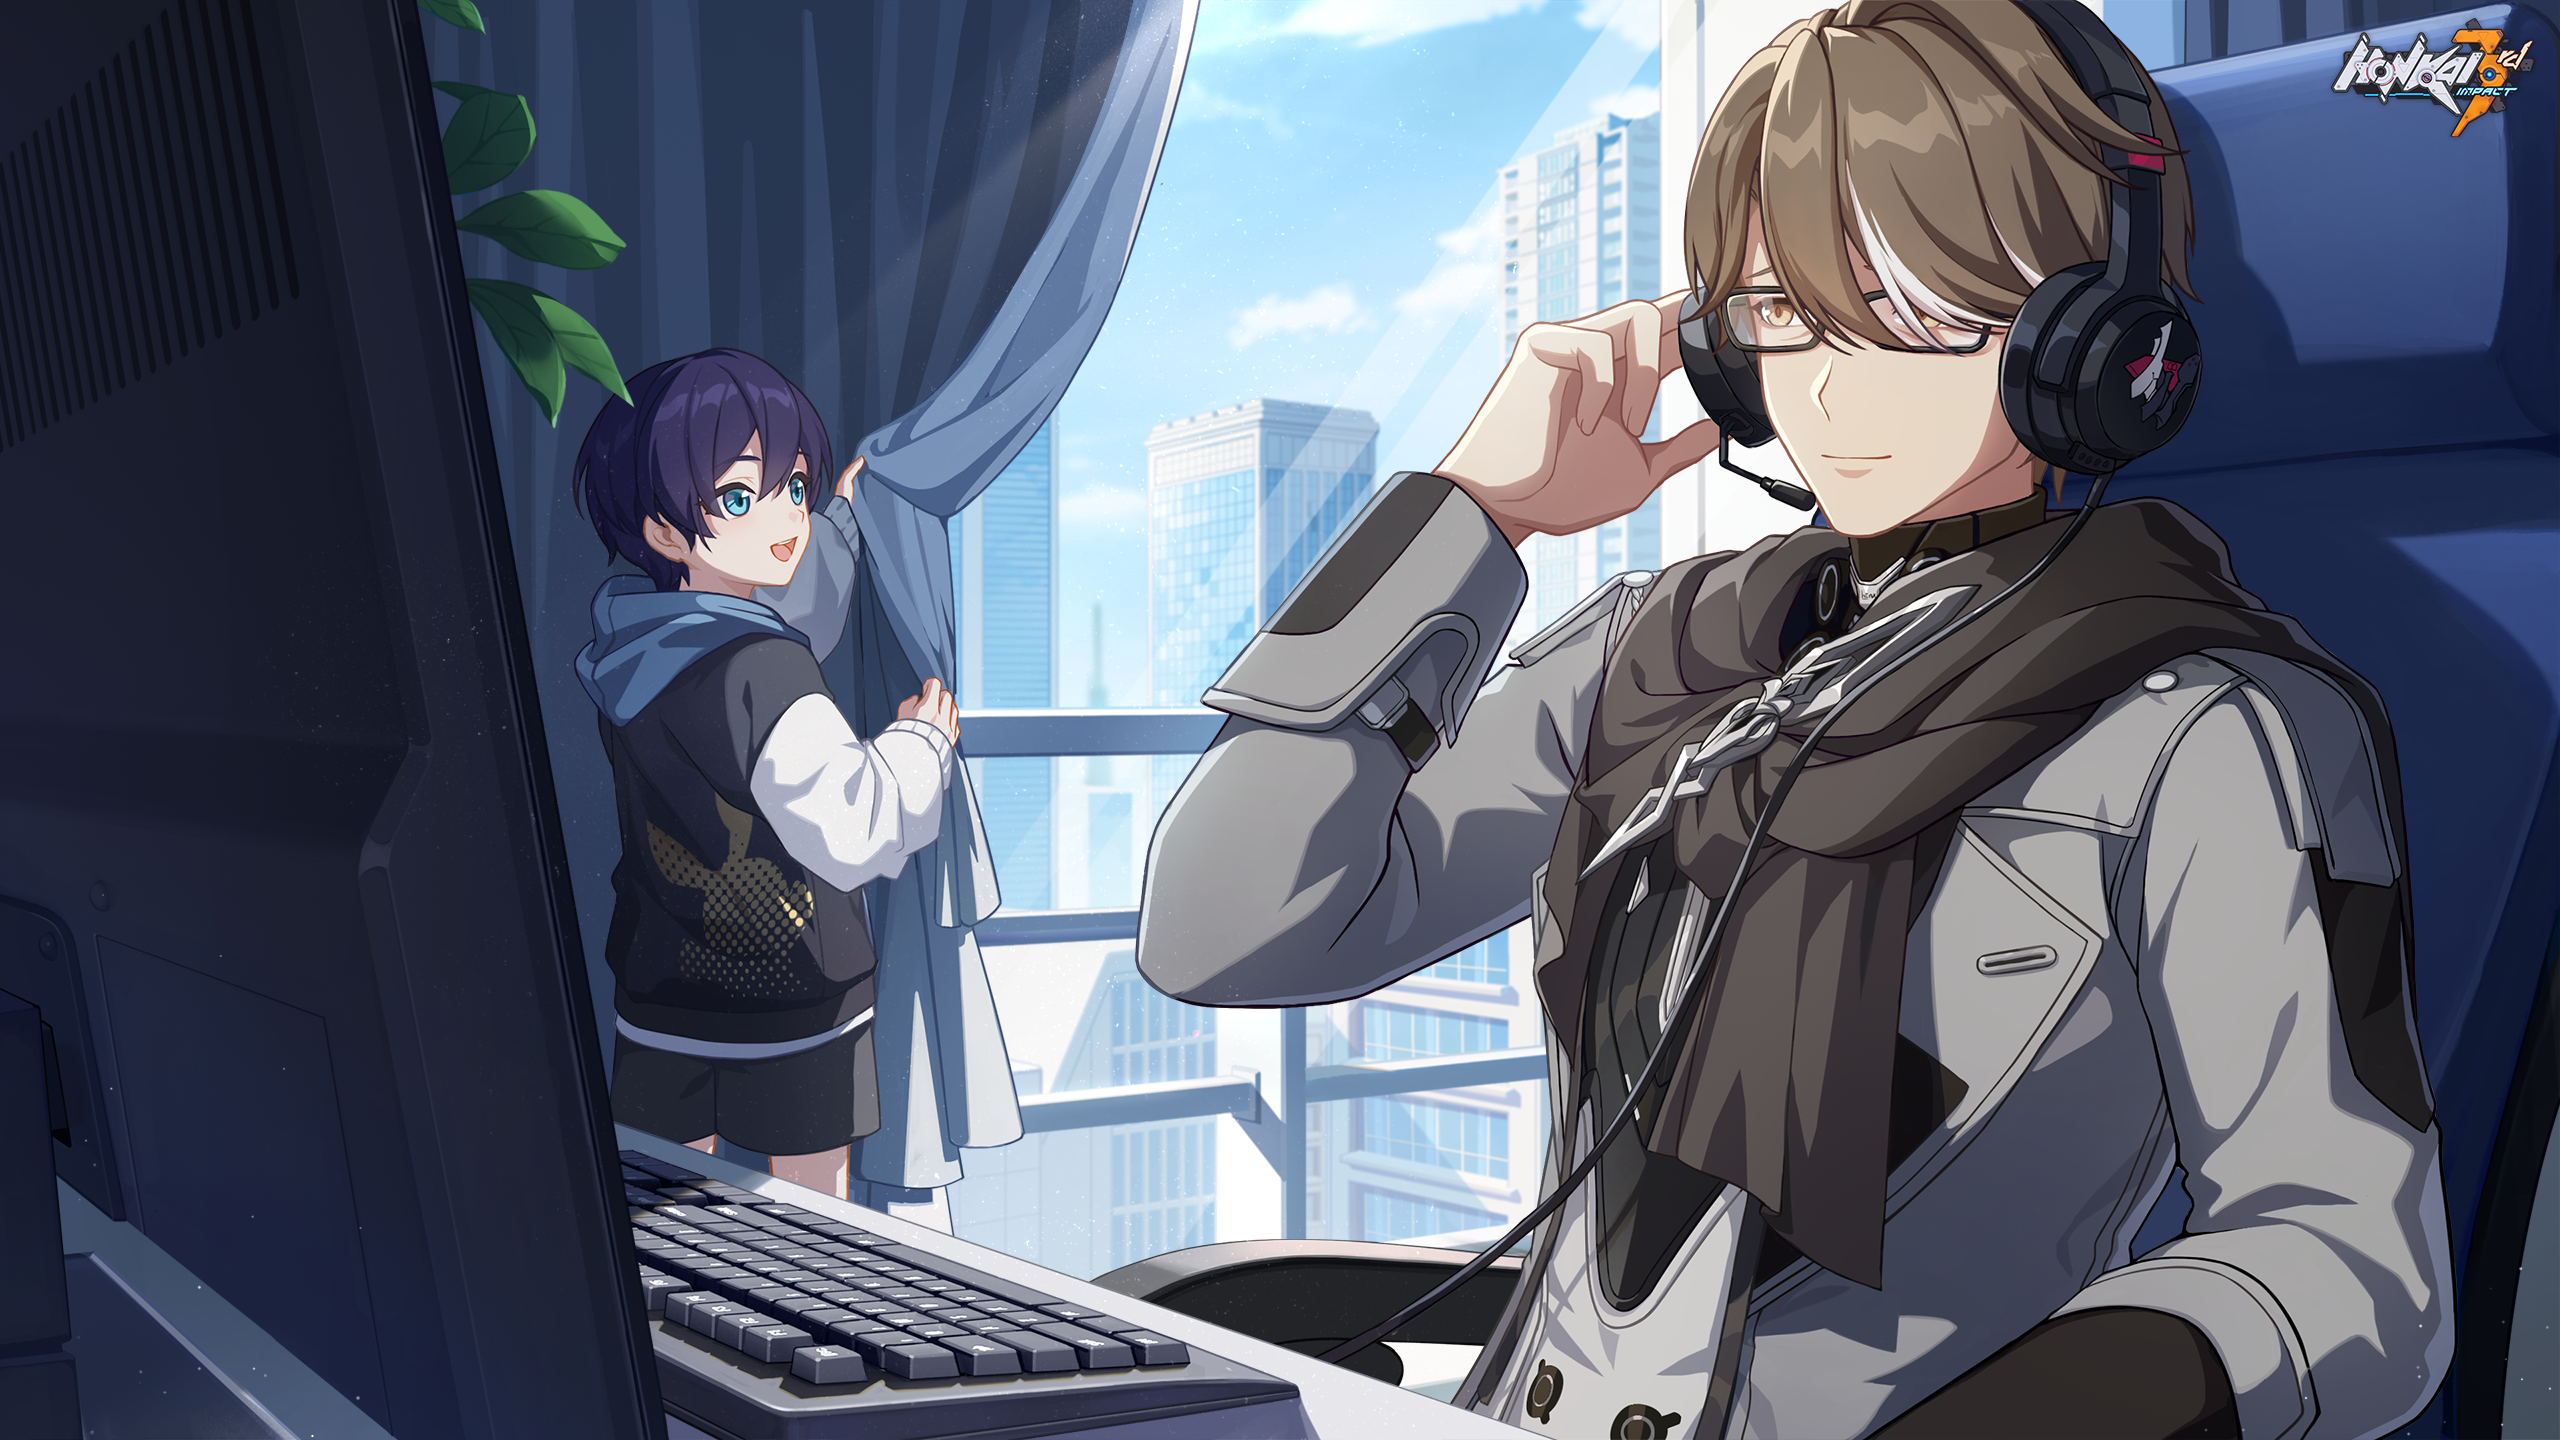 Anime 2560x1440 Honkai Impact Honkai Impact 3rd video games illustration headsets men indoors video game characters CGI video game boys sitting video game art screen shot glasses men with glasses hair between eyes monitor keyboards headphones building curtains sky clouds scarf leaves open mouth brunette brown eyes anime games